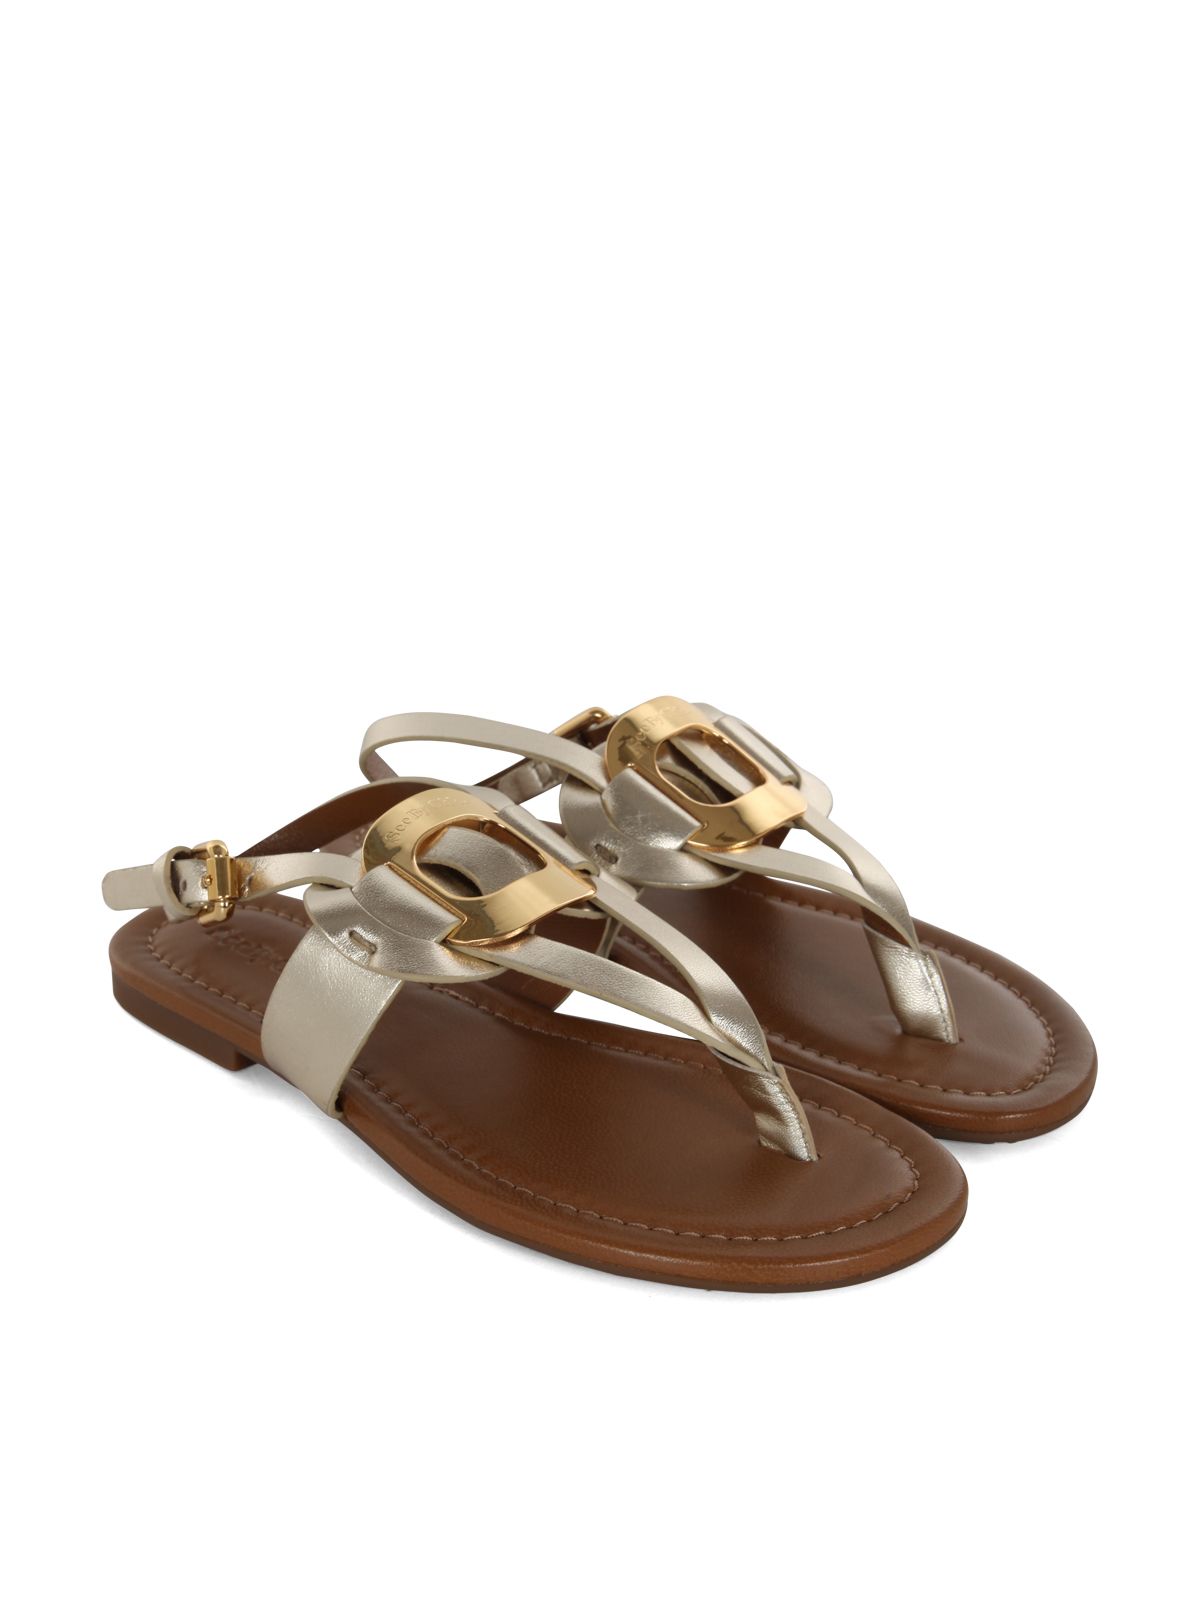 Shop See By Chloé Women's Bands Sandals